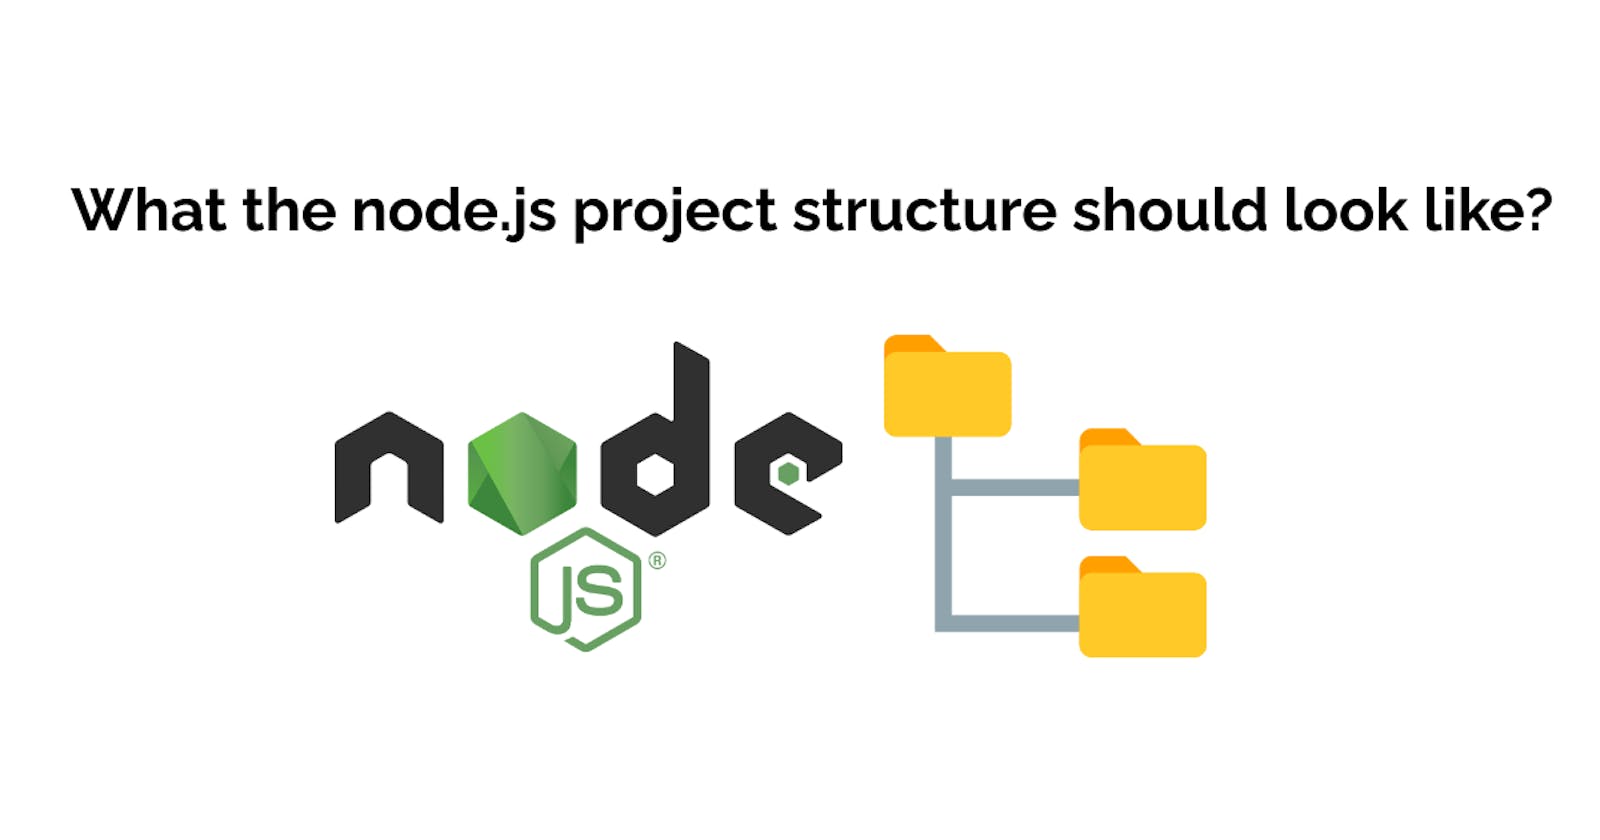 What the node.js project structure should look like?